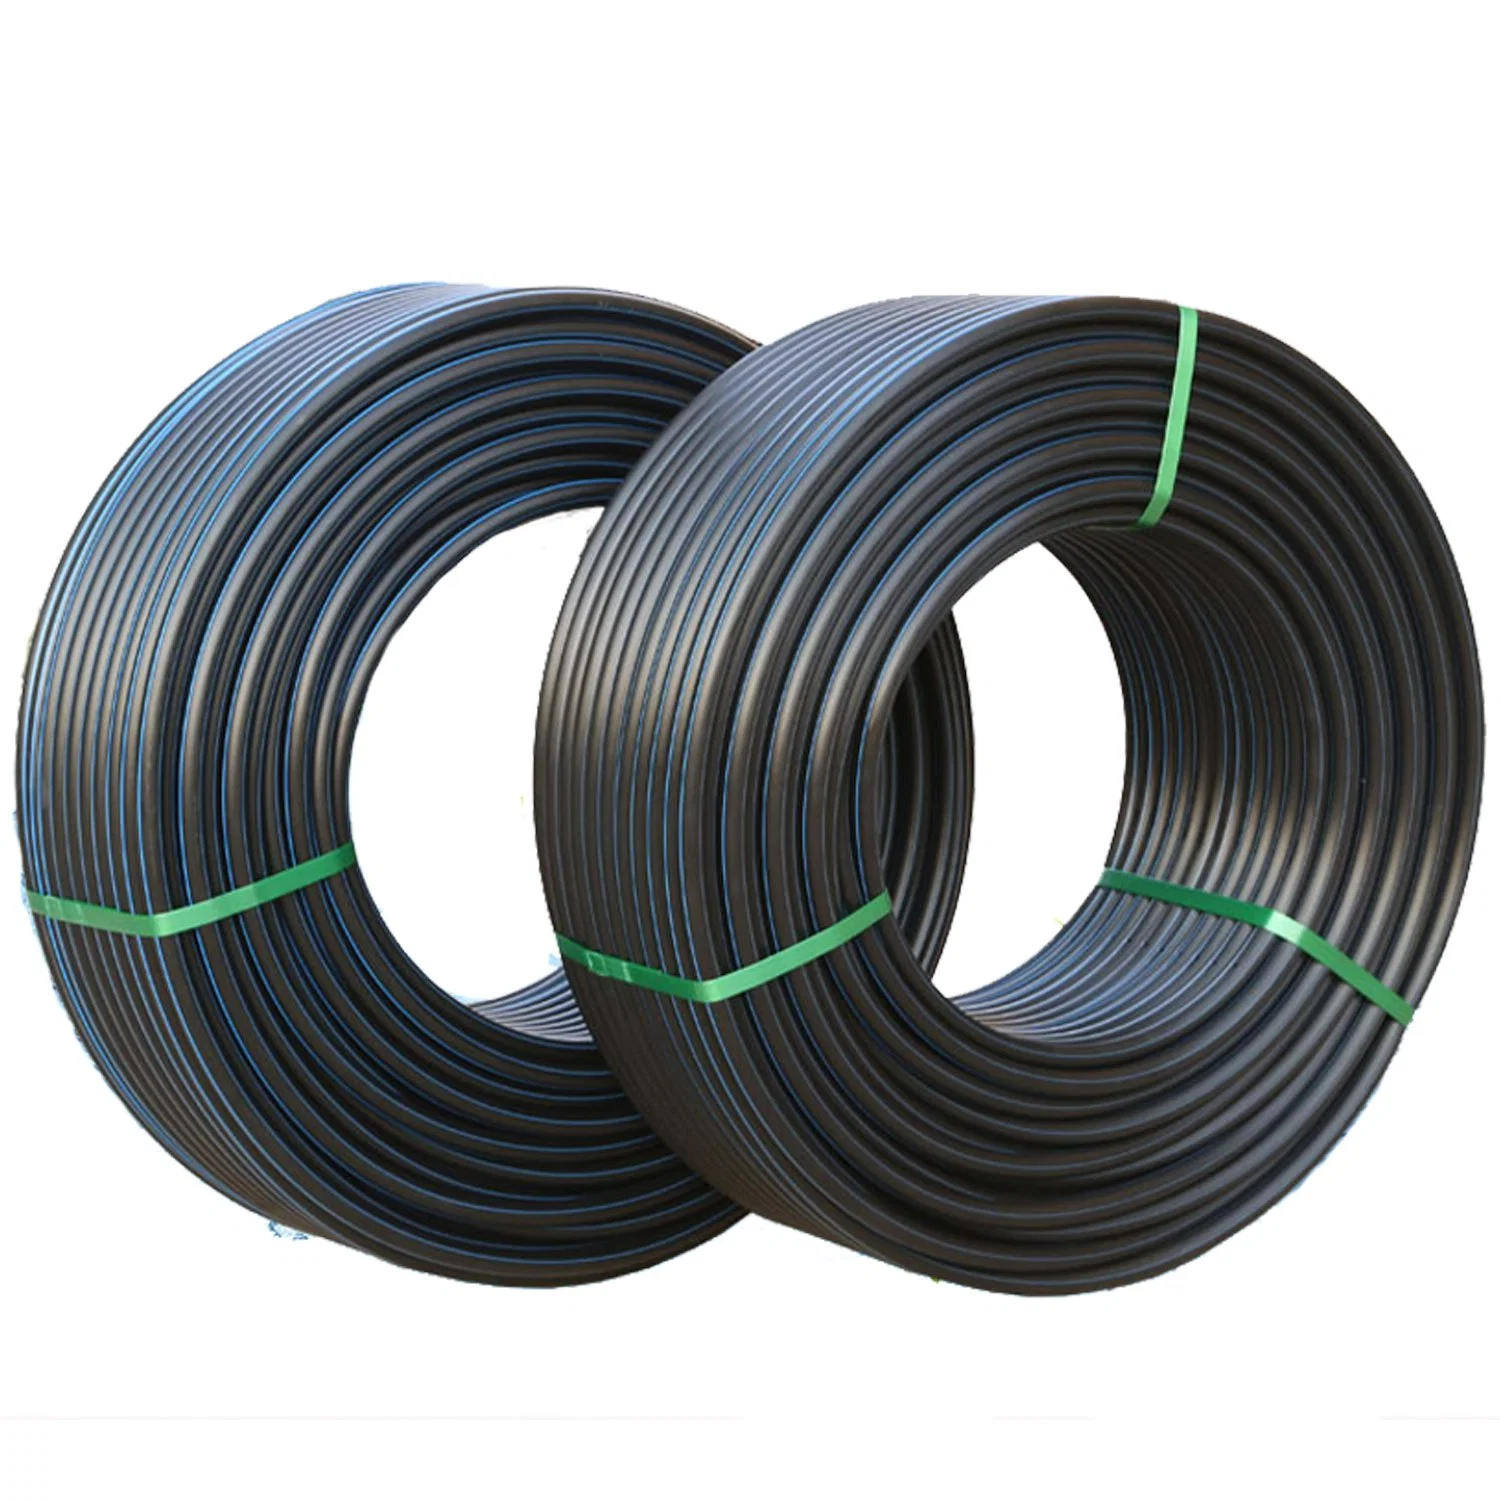 HDPE Pipe 0.8MPa*DN180 Plastic Tubes Water Supply PE Pipes Thickness 8.6mm